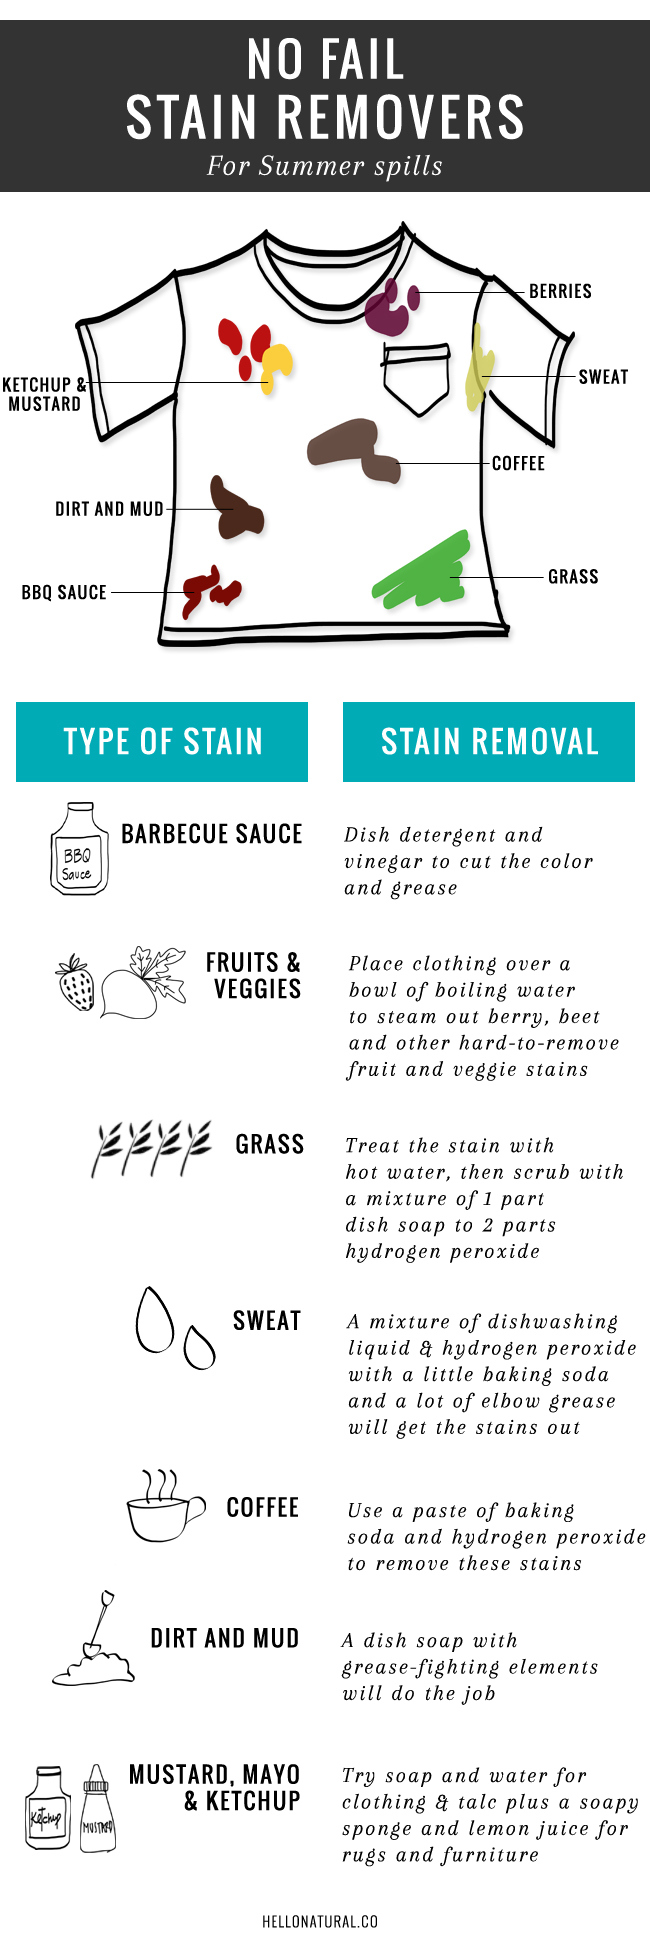 Stain remedies